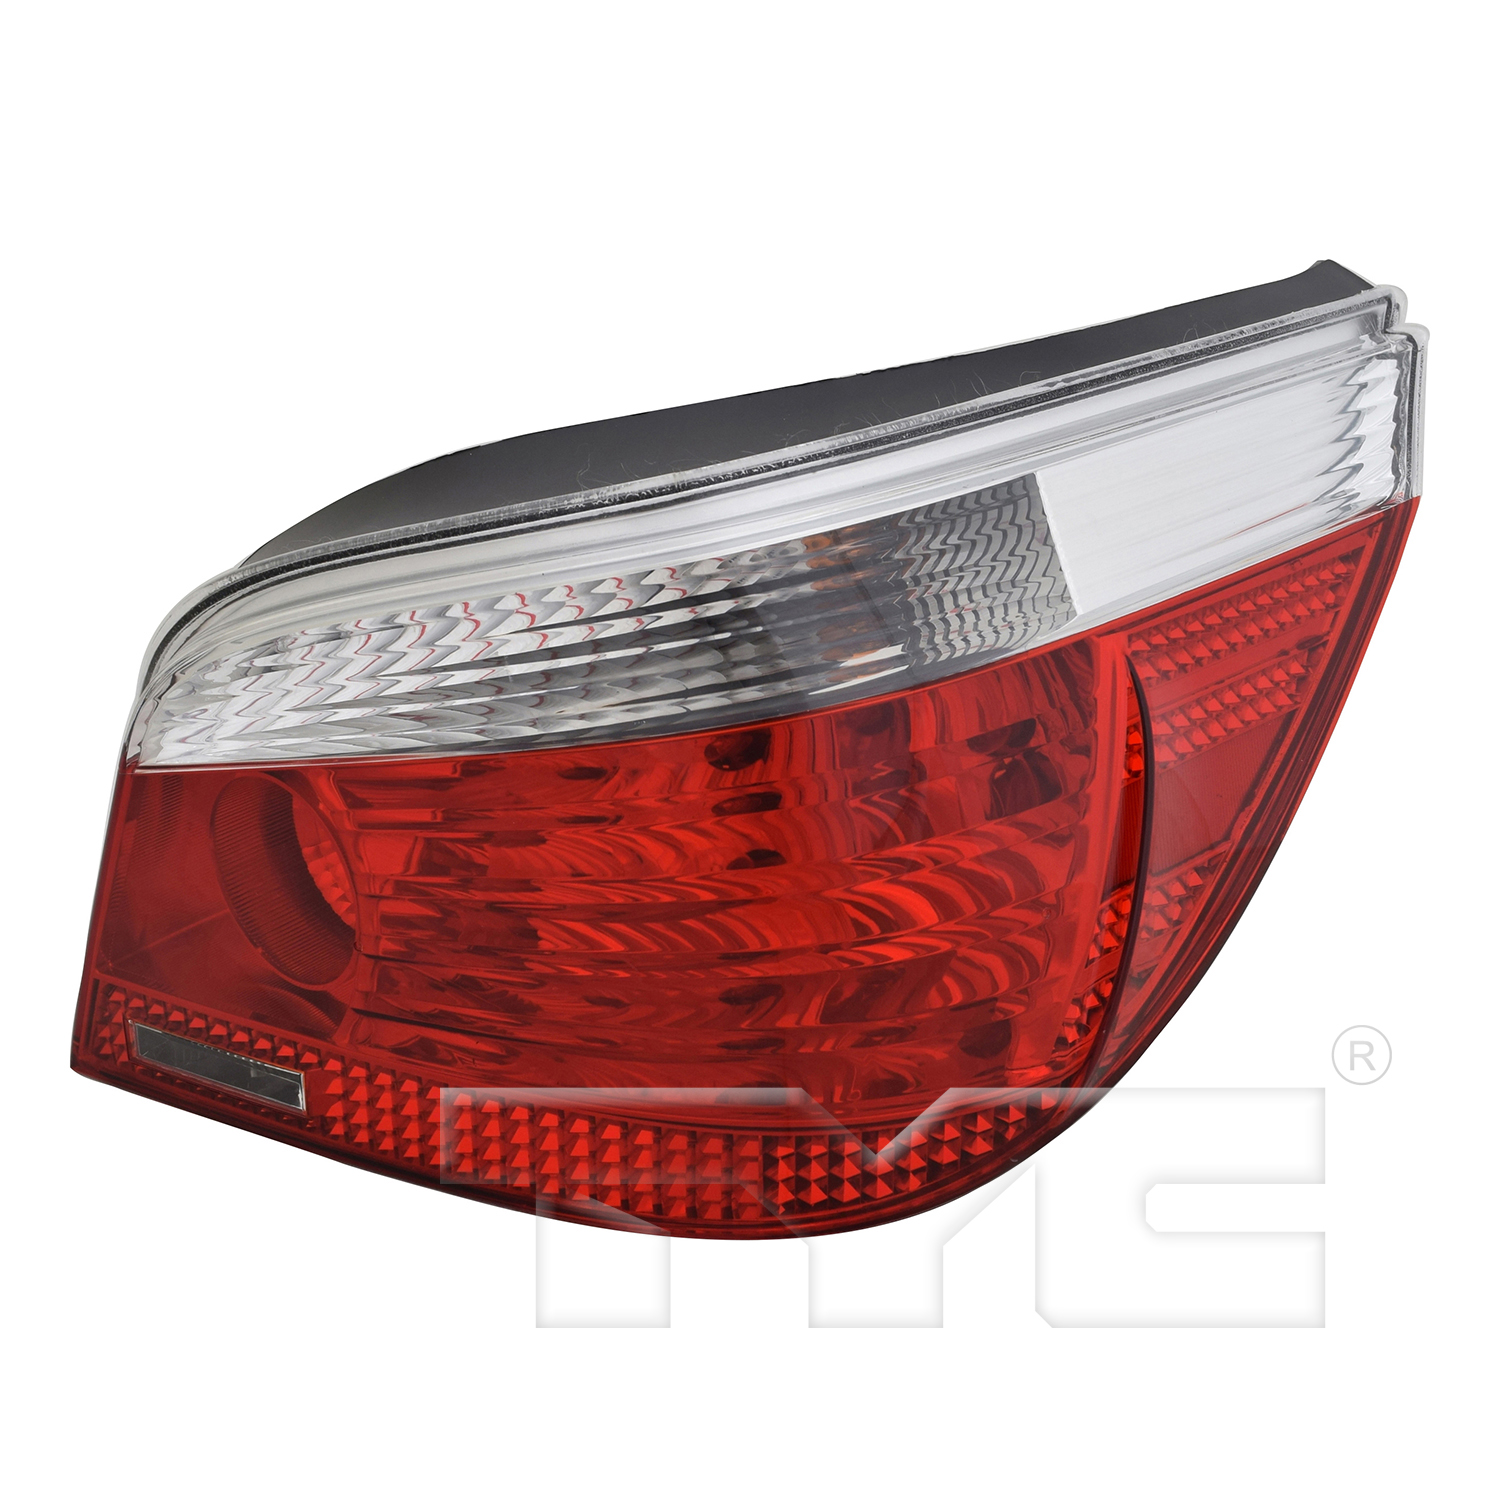 Aftermarket TAILLIGHTS for BMW - 550I, 550i,06-08,RT Taillamp assy